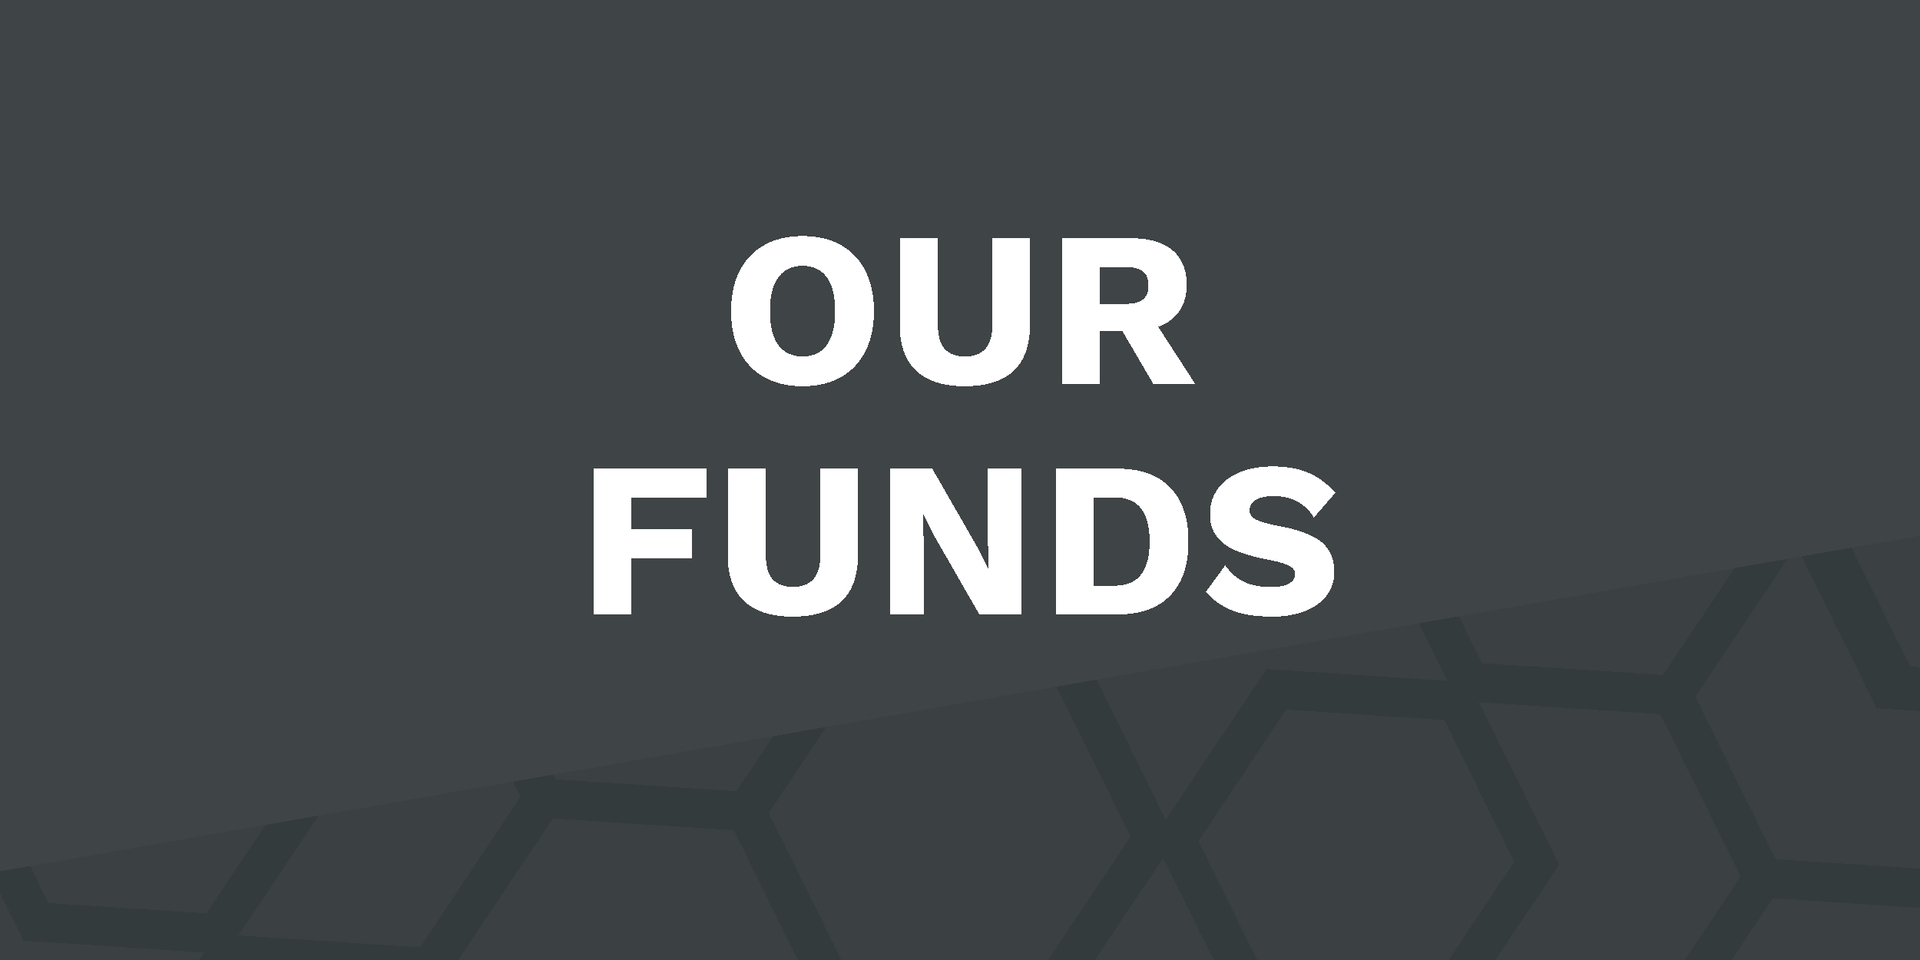 A black background with white text that says `` our funds ''